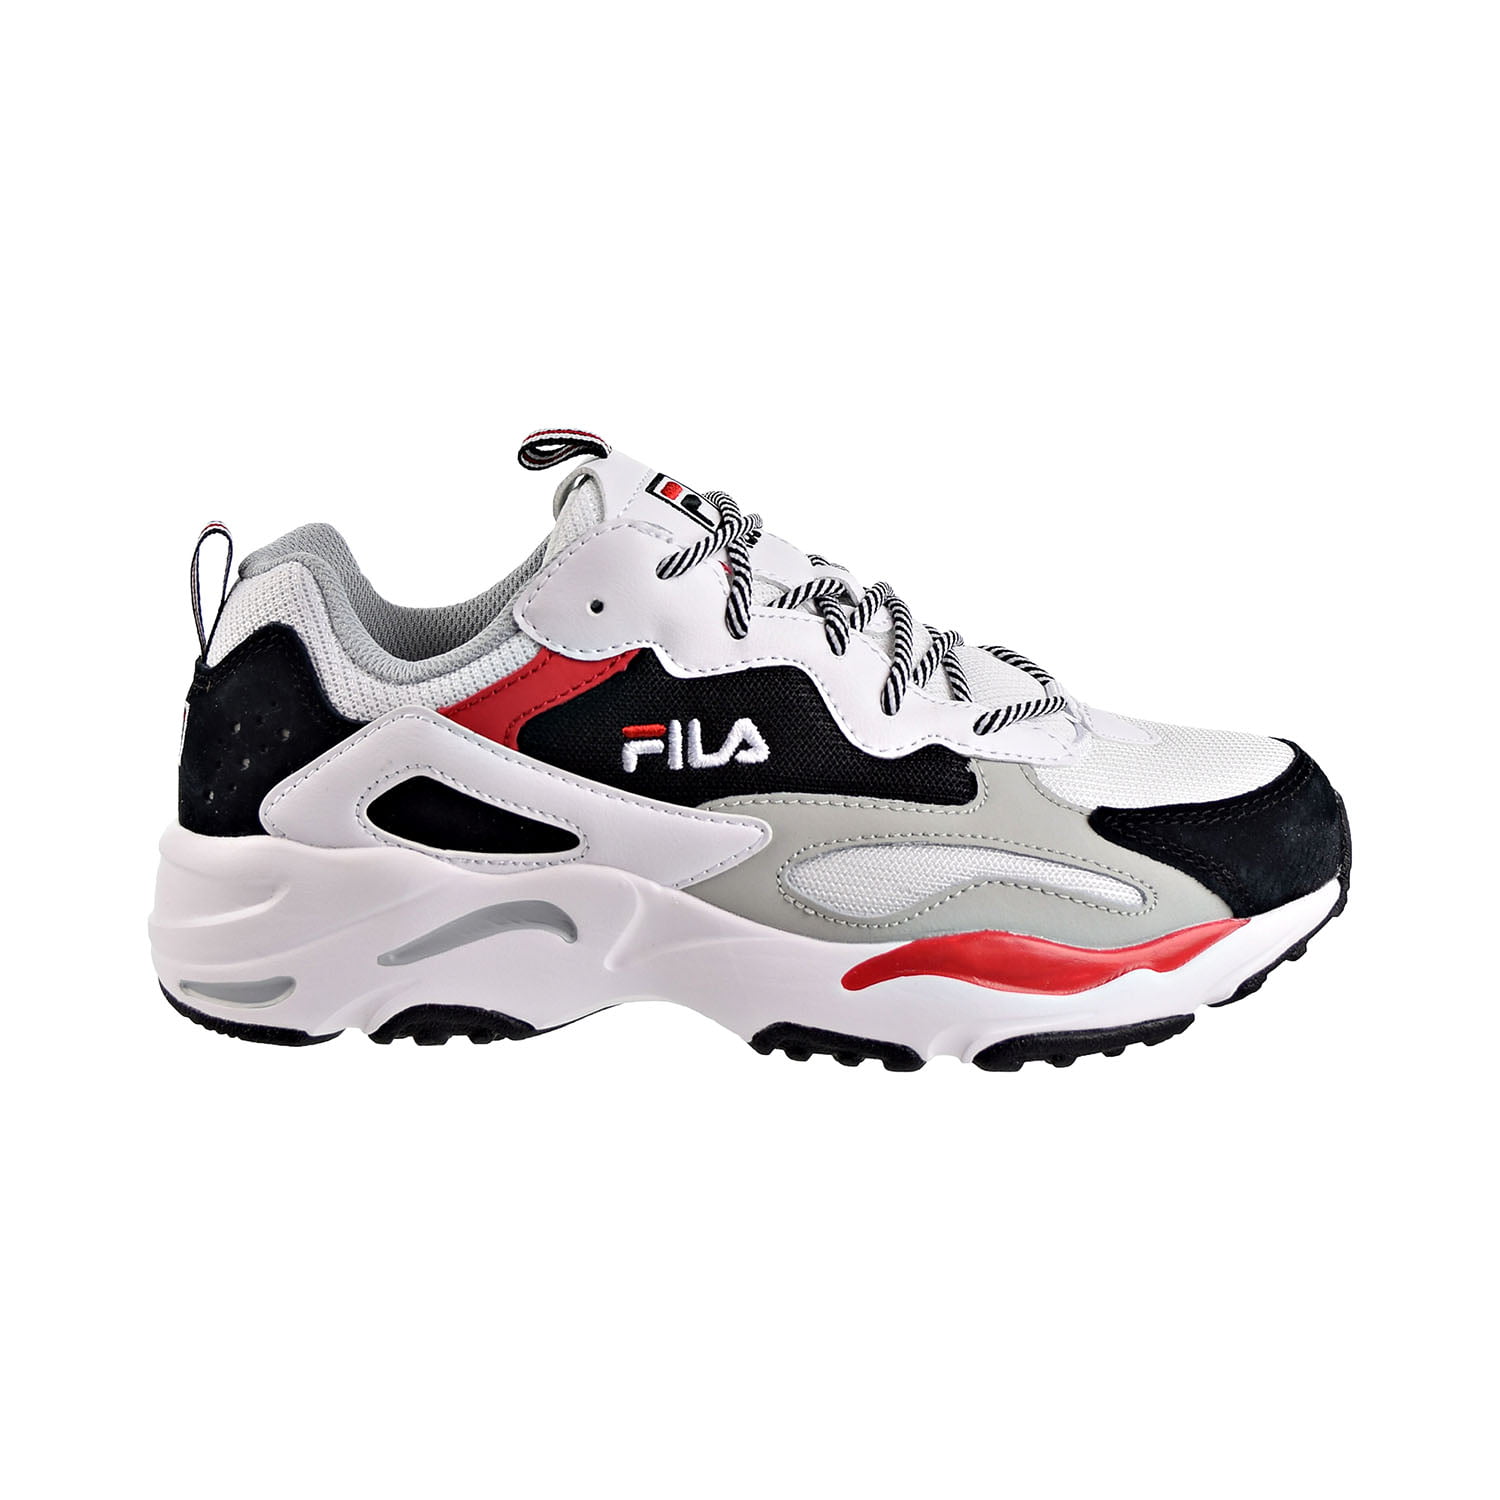 fila ray tracer in store